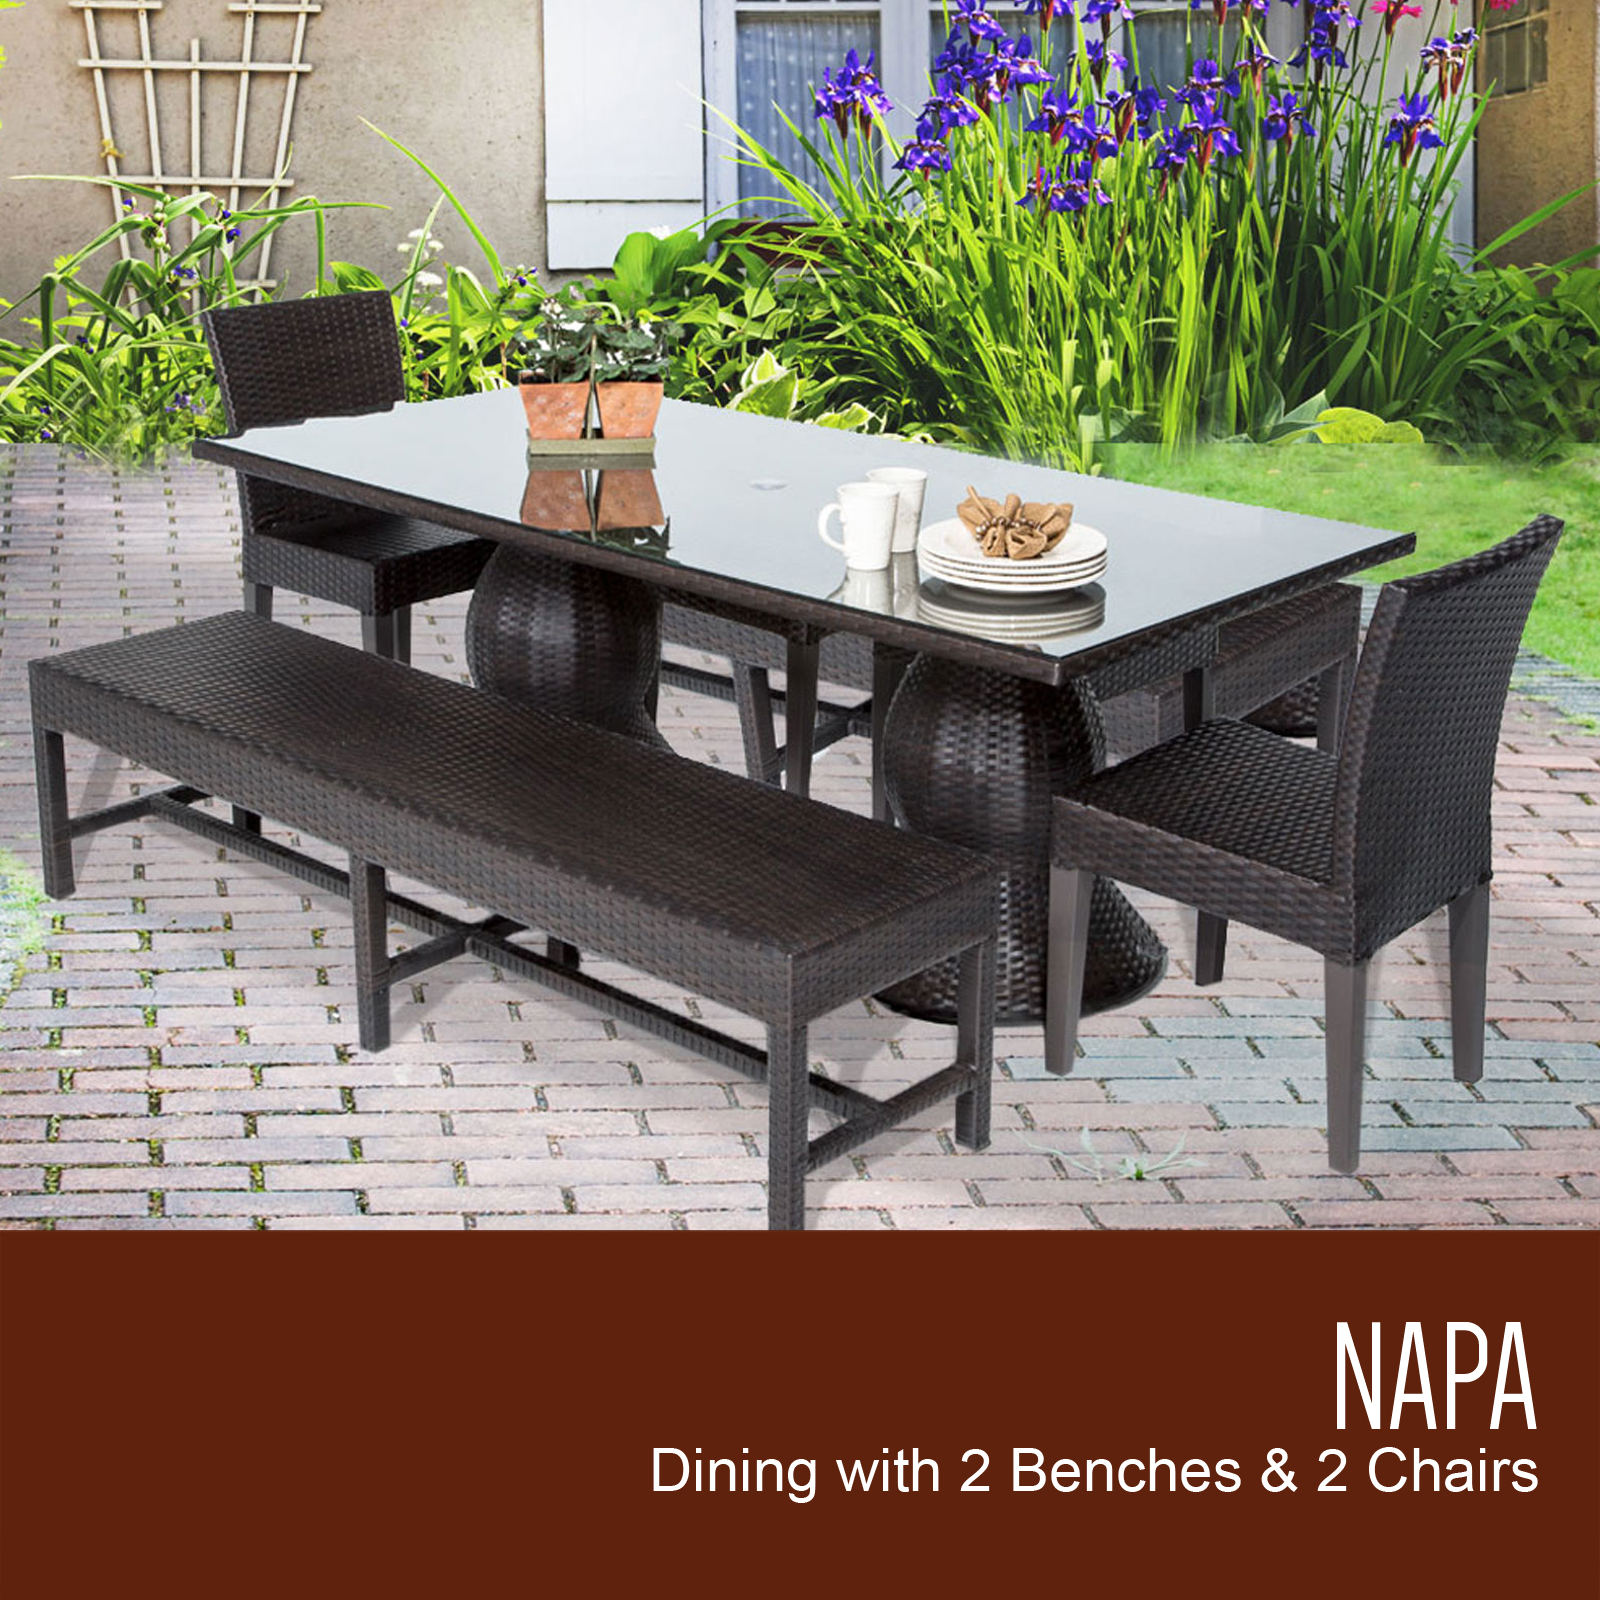 Napa Rectangular Outdoor Patio Dining Table With 2 Chairs ...